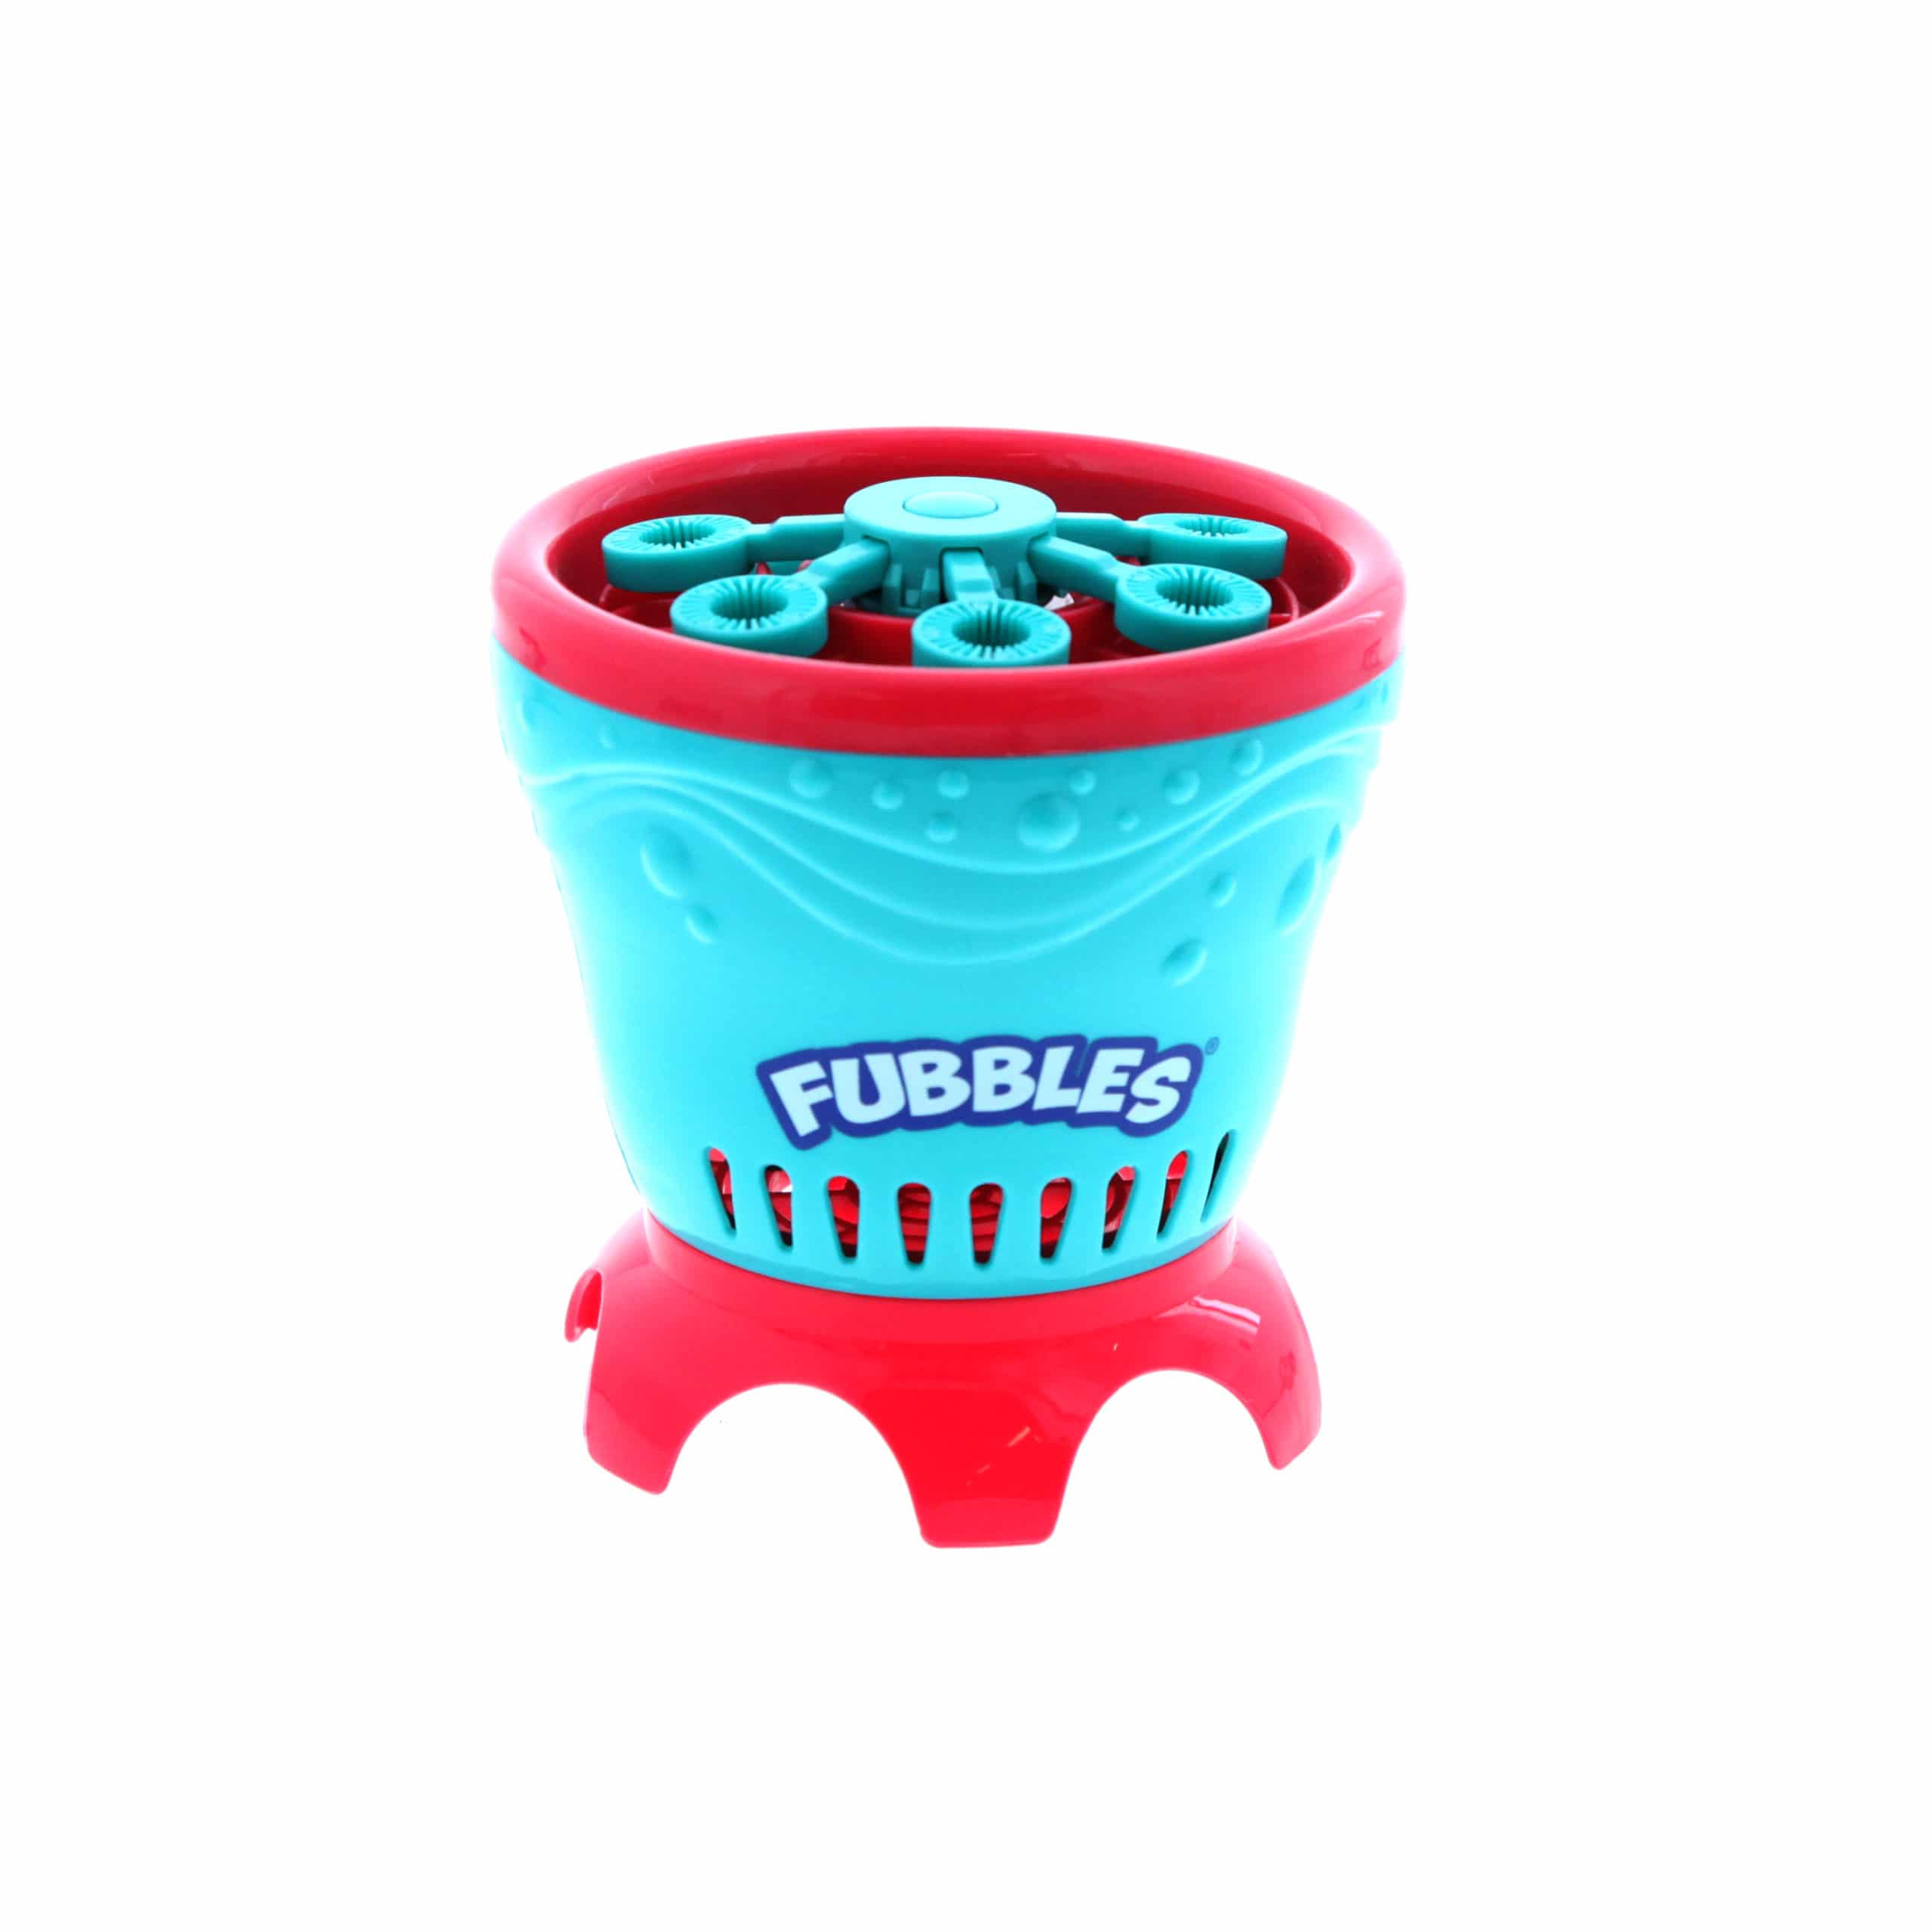 Red and blue bubble blower product.